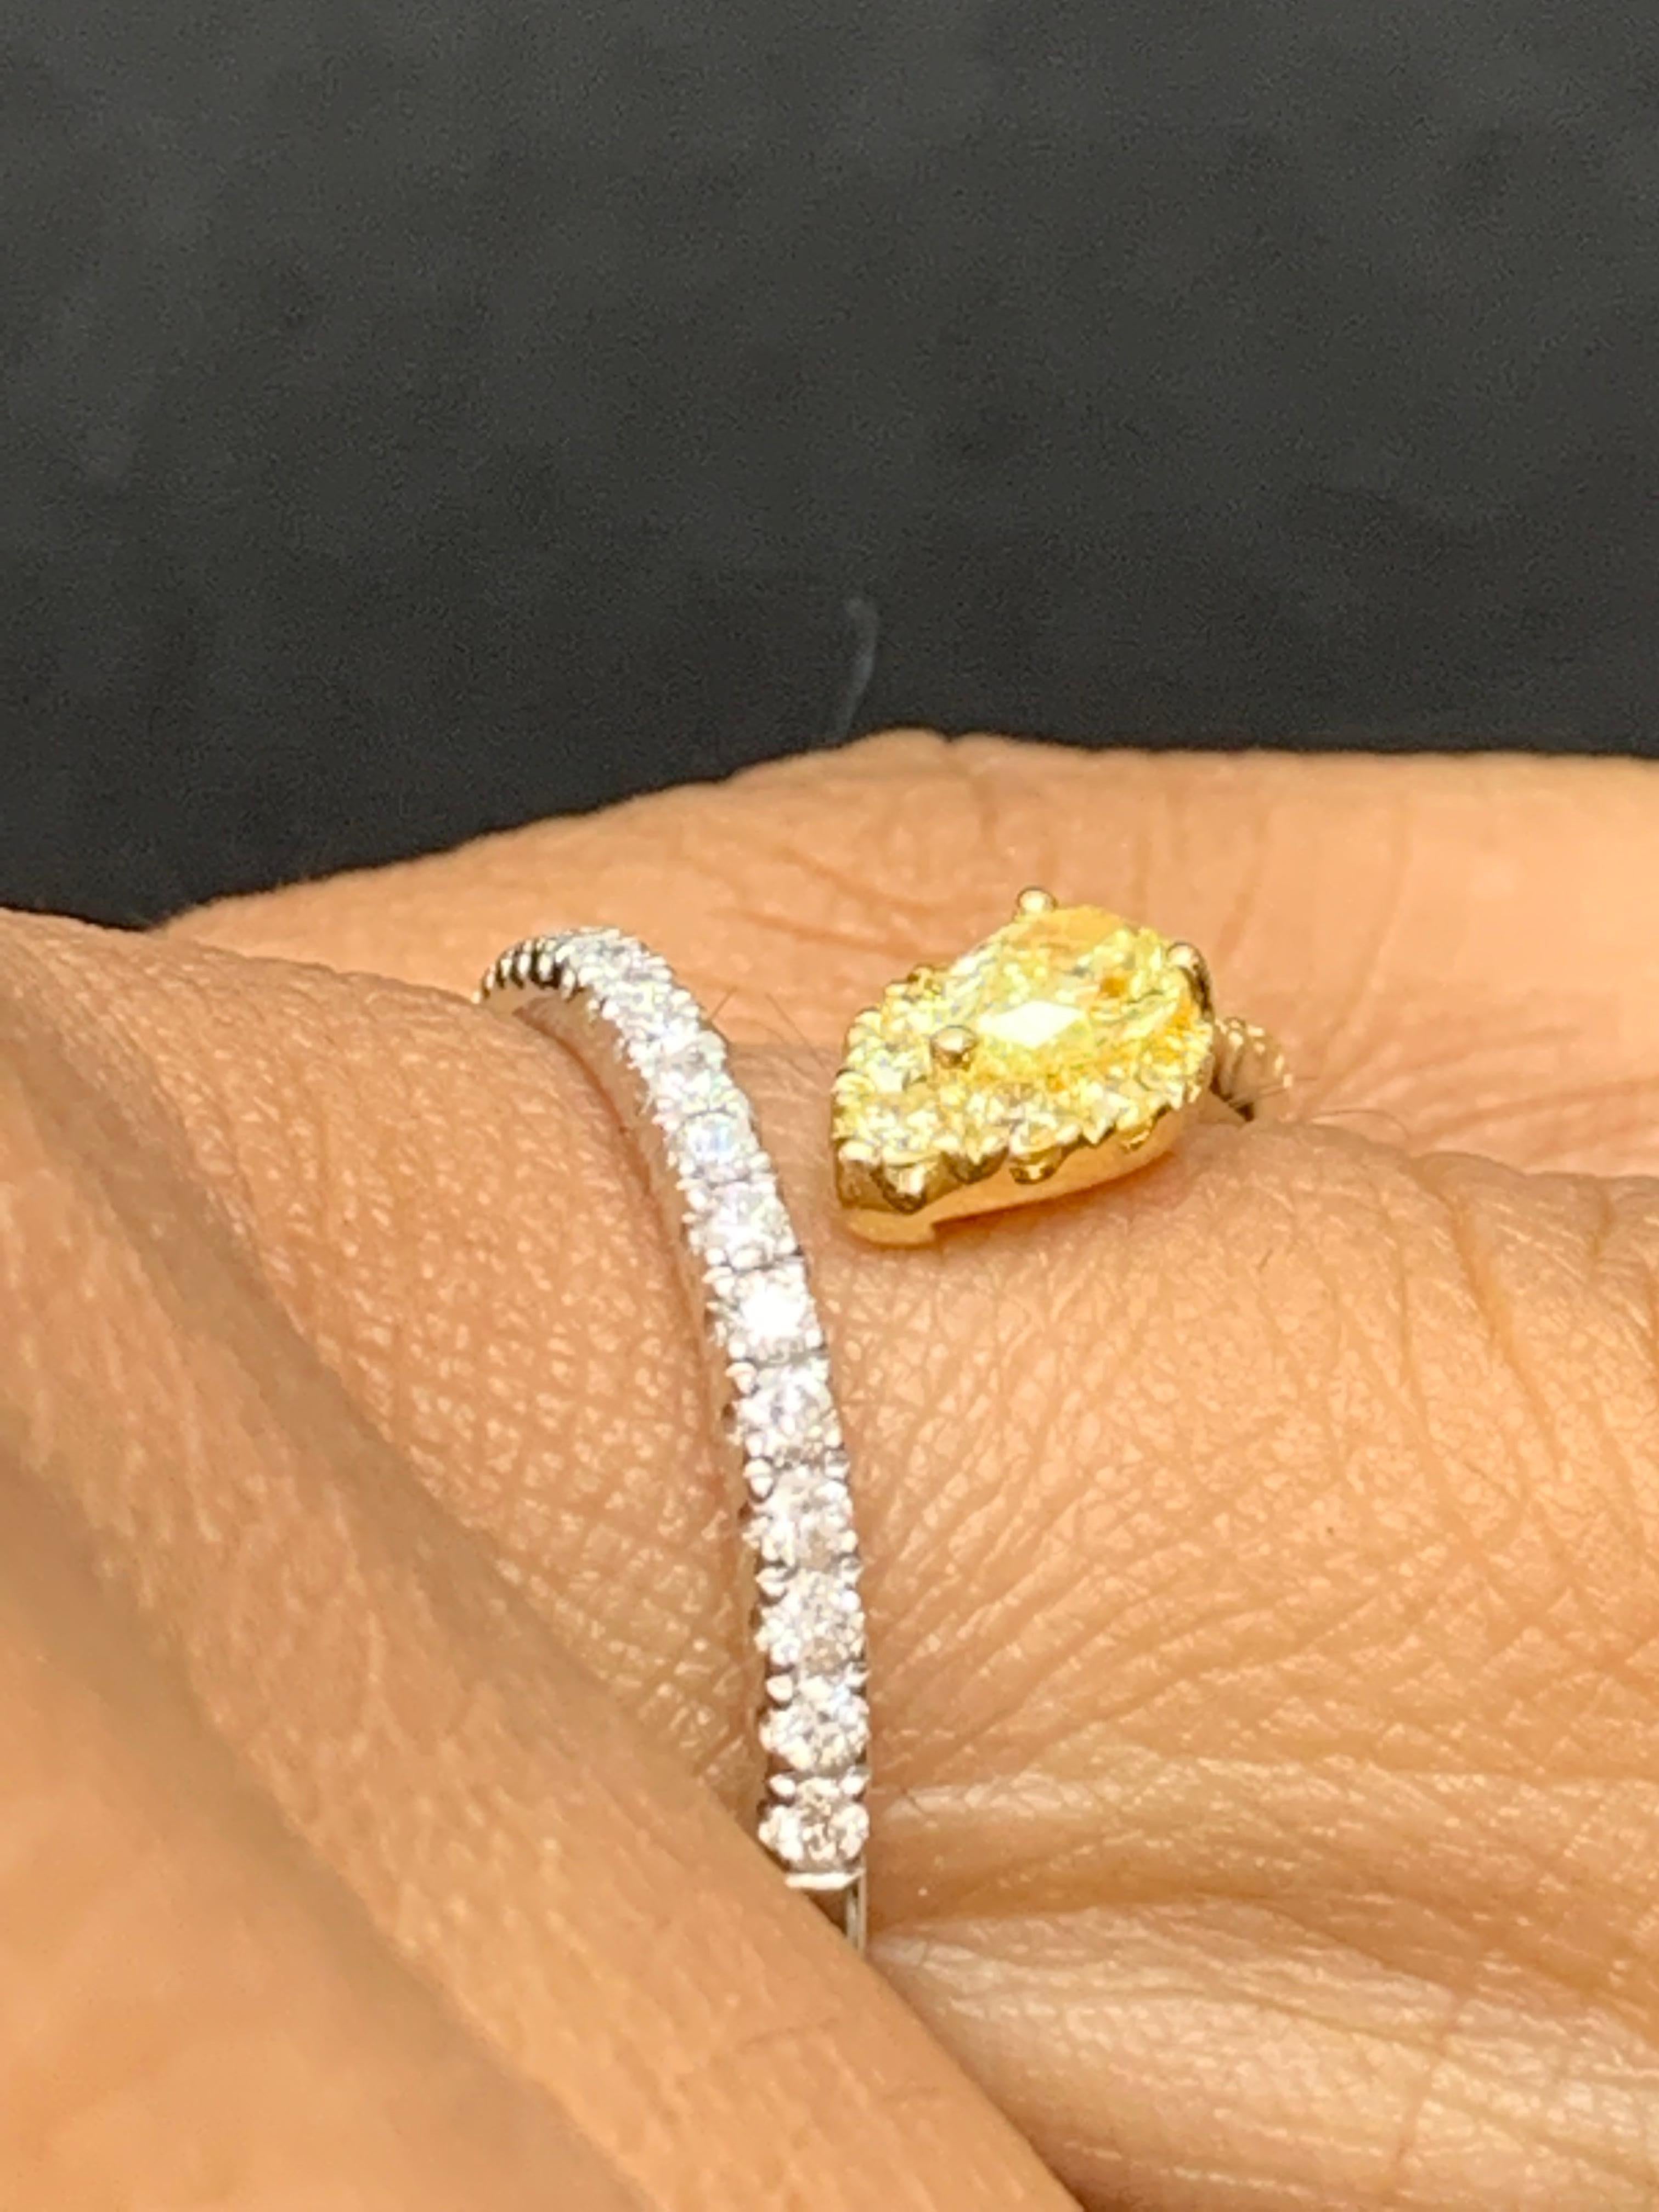 A fashionable piece of jewelry showcasing 0.30 carat of yellow diamond and 2 rows of brilliant cut white and yellow diamonds.  21 white diamonds weigh 0.21 carats and 17 yellow diamonds weigh 0.17 carats in total.

Size 6.5 US (Sizable). One of a